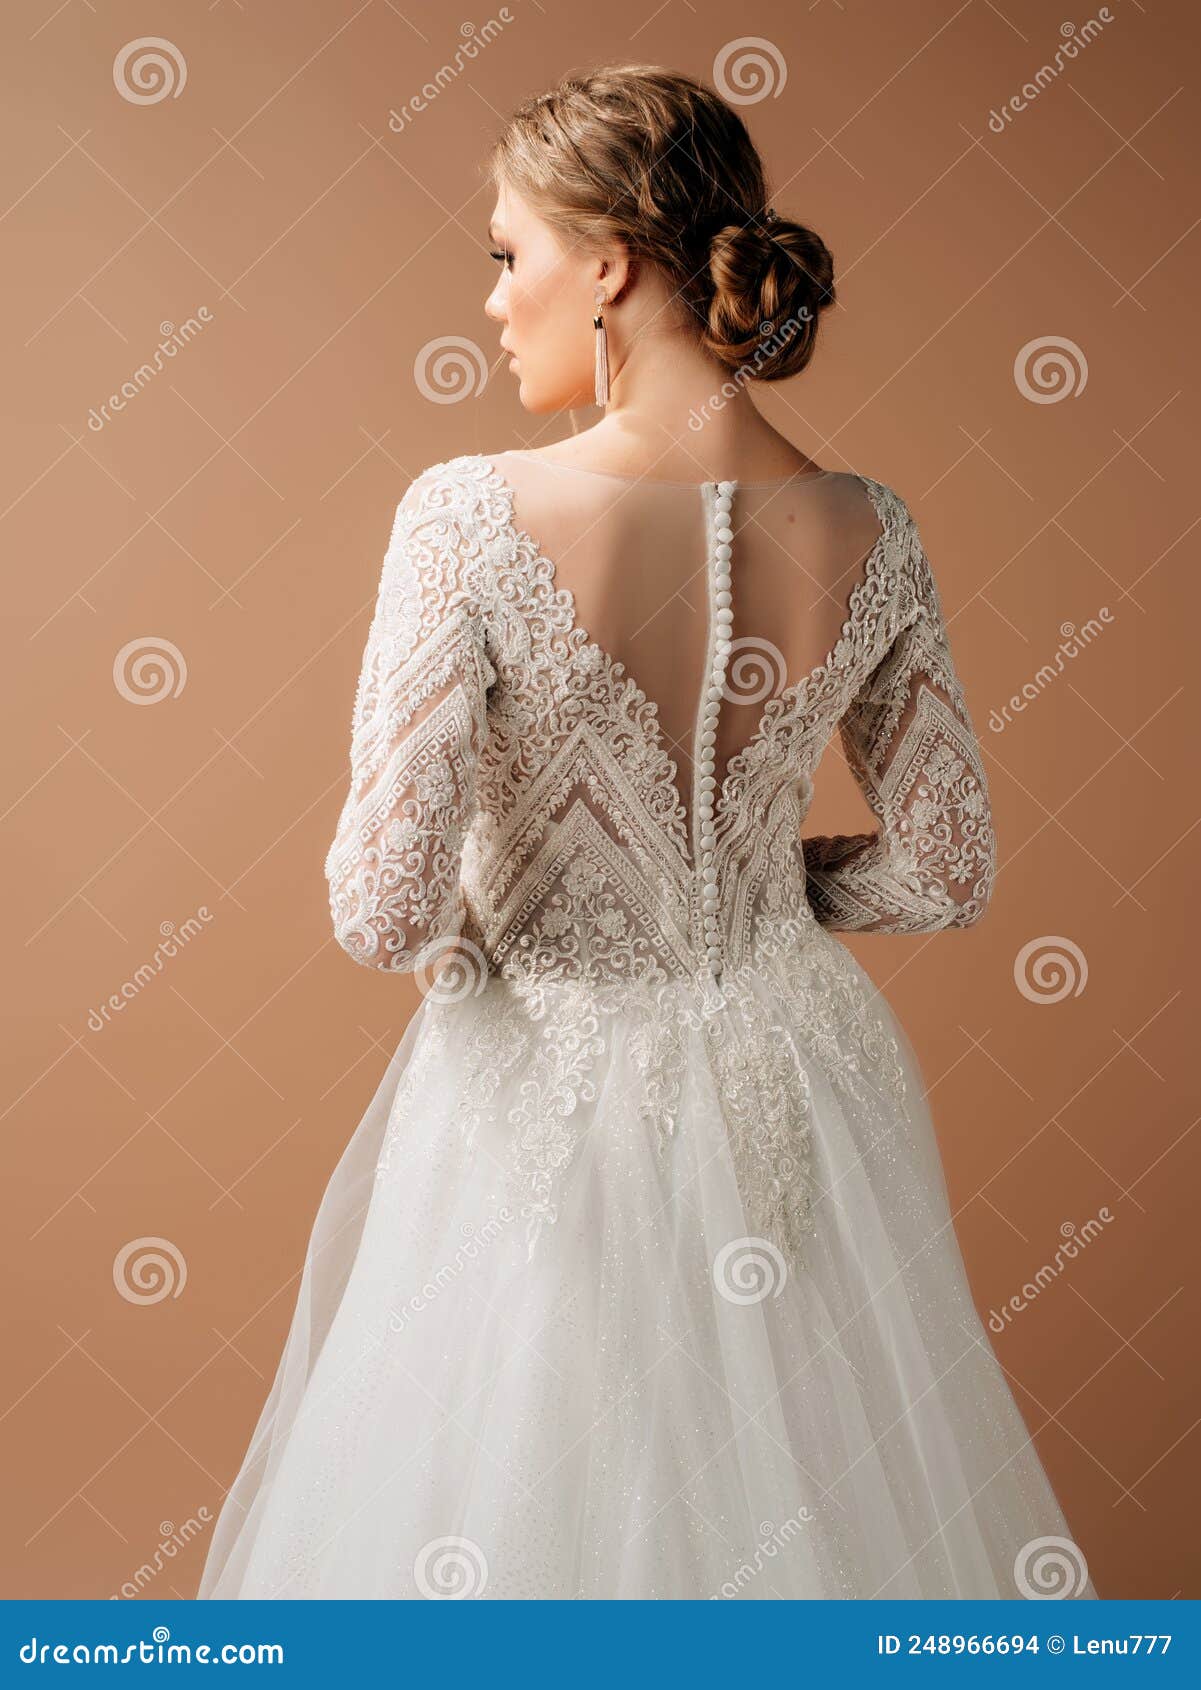 Luxury Shiny Lace Wedding Dress. Summer Backless Long Sleeve Bridal Gown  with Tulle Skirt Stock Photo - Image of backless, hairstyle: 248966694